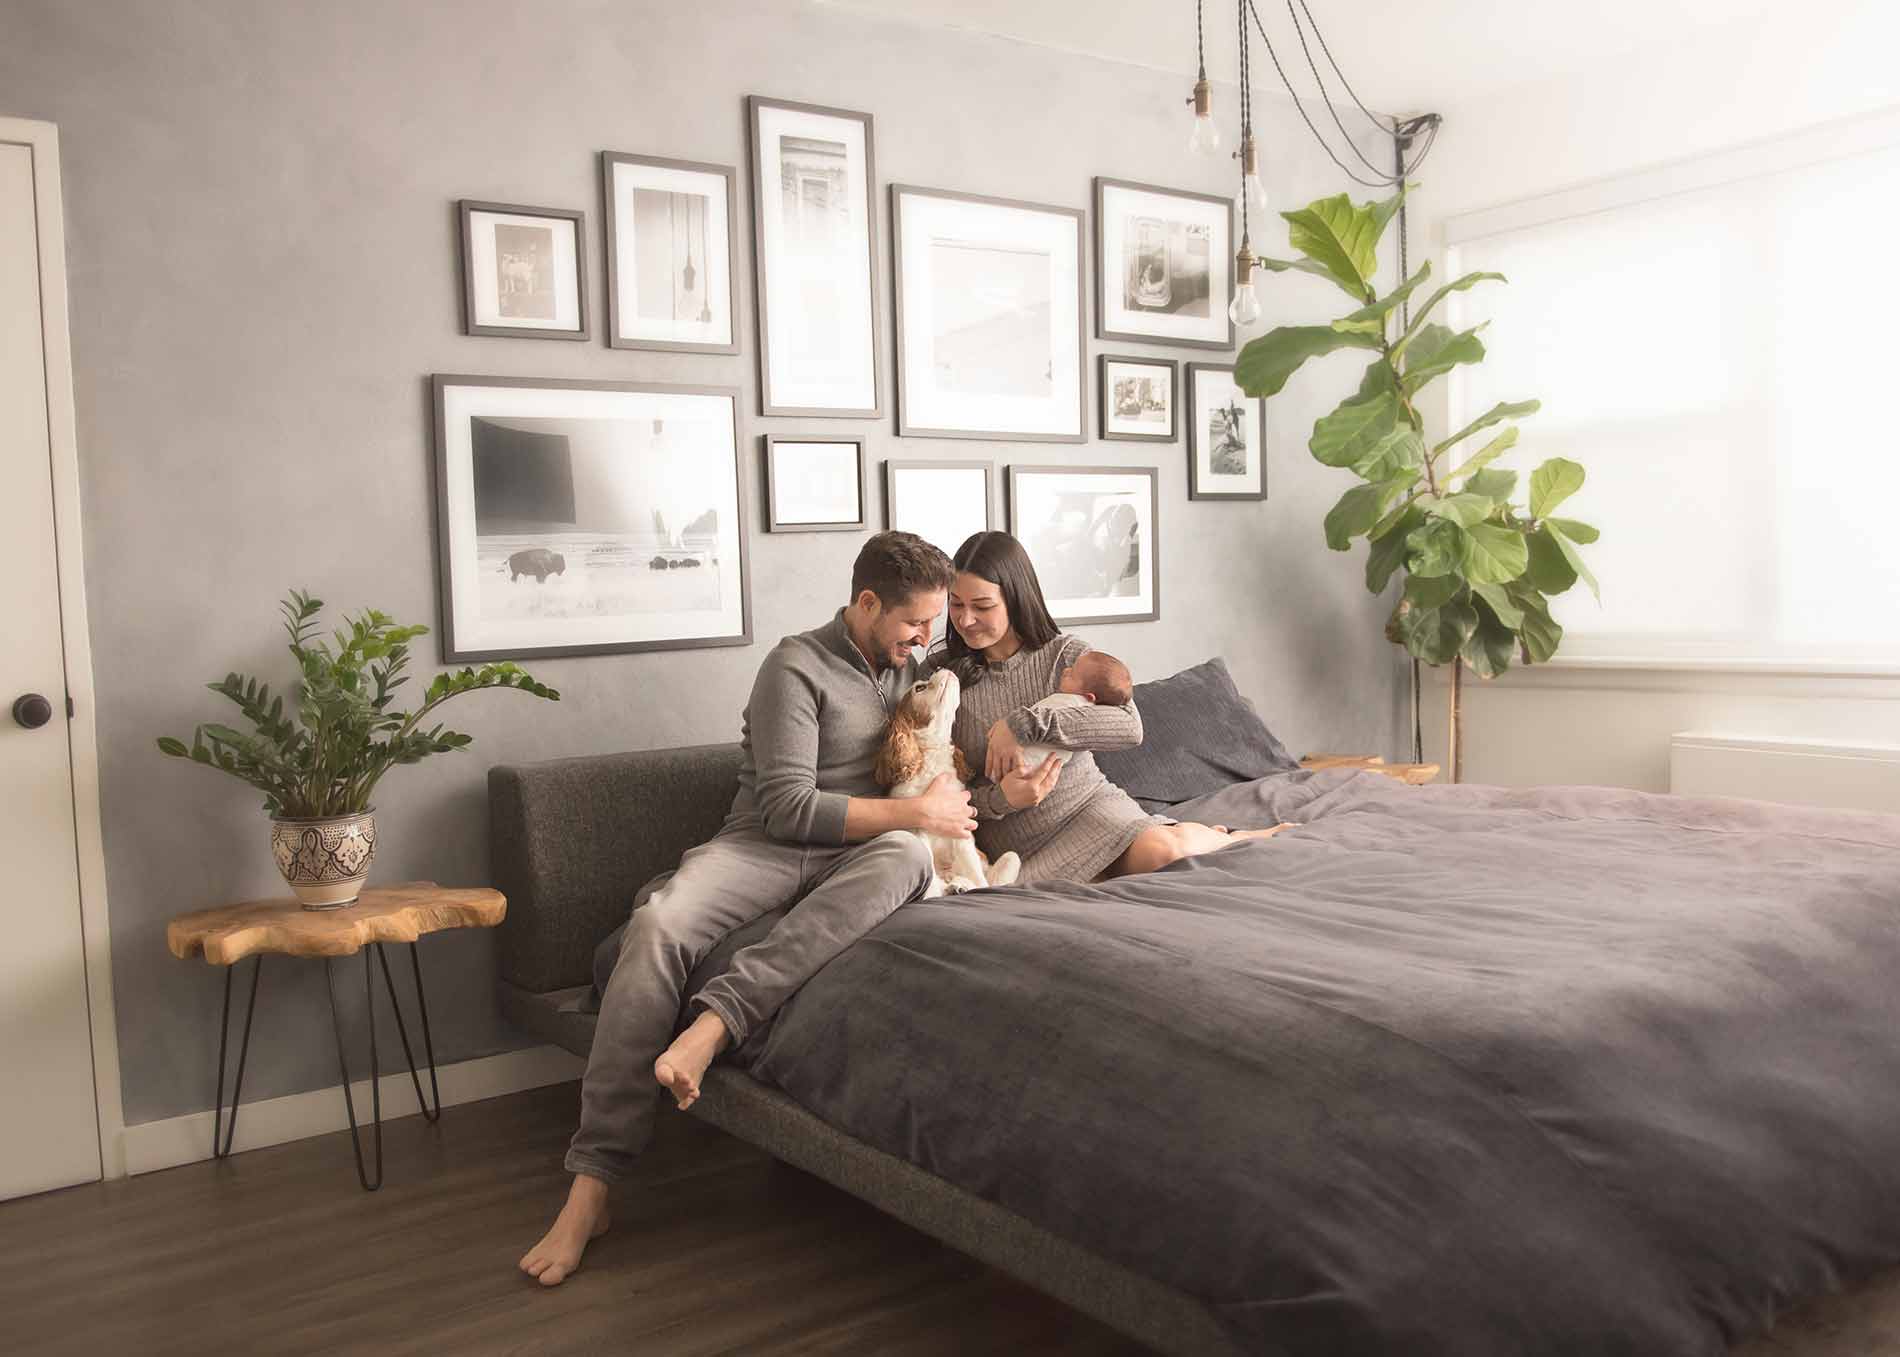 Photo of a modern Denver family sitting on bed with their newborn baby